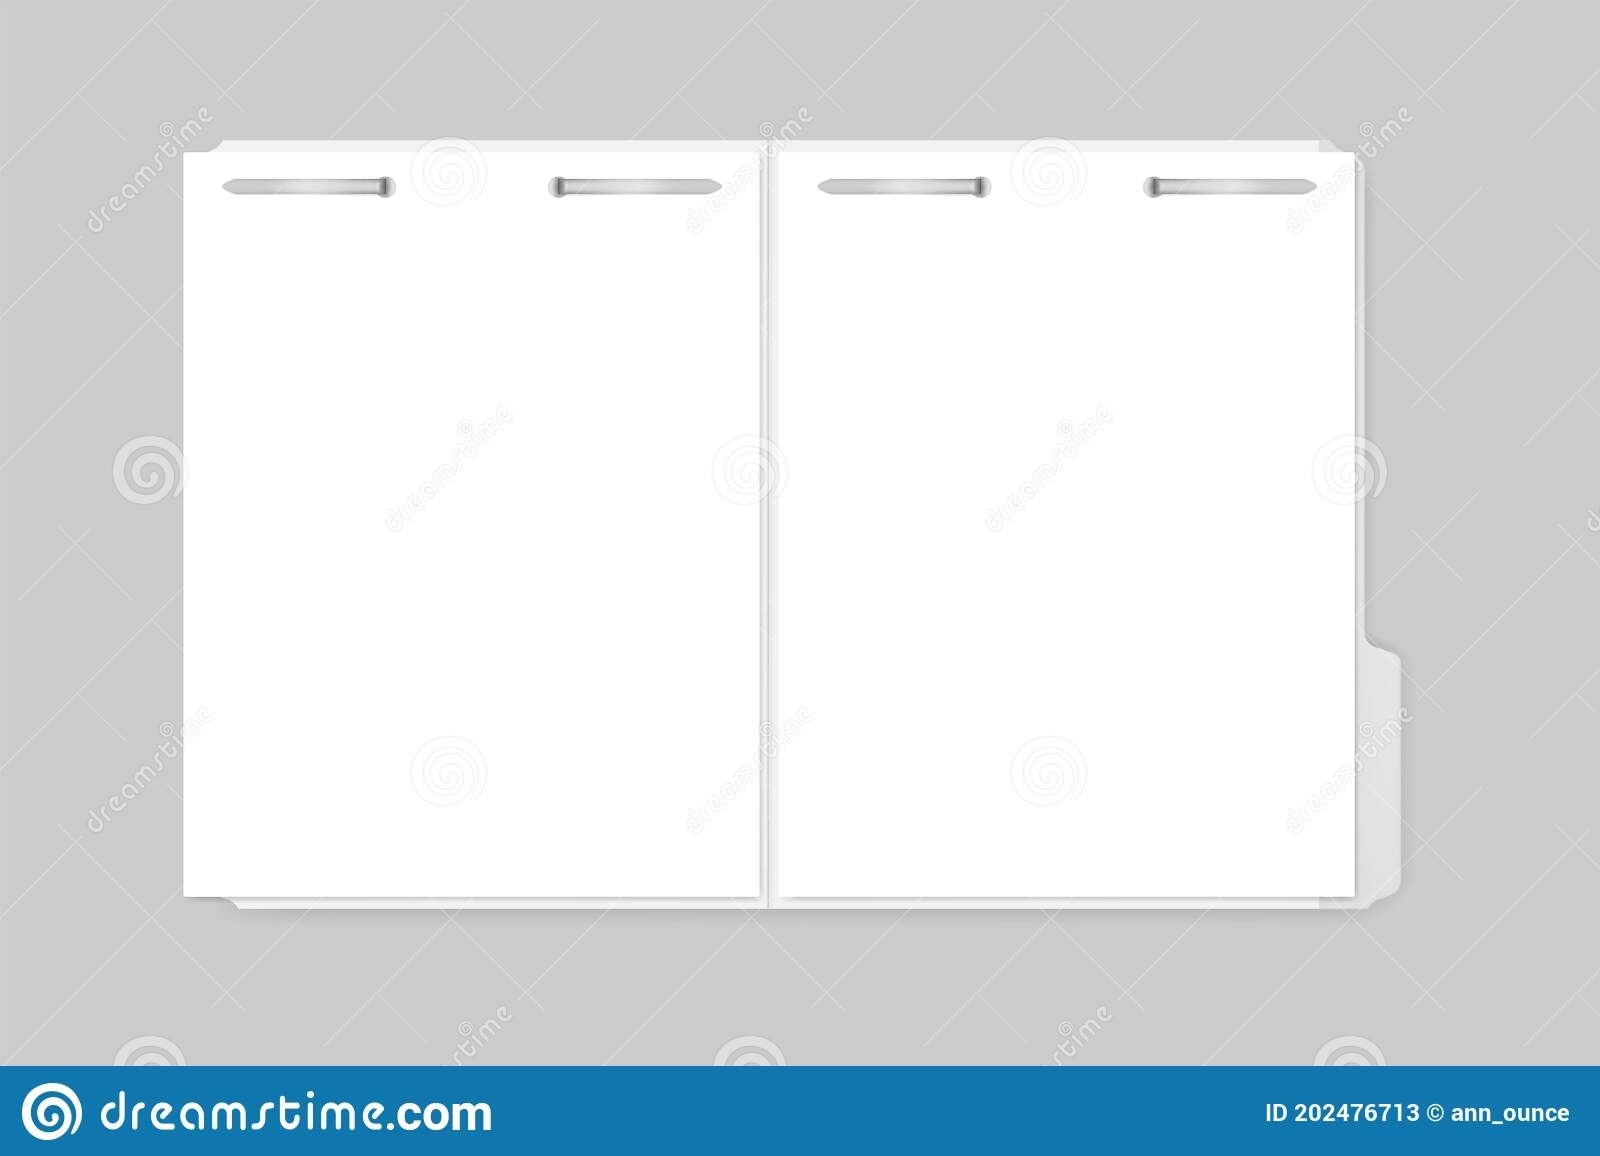 Open File Folder With Tab And Metal Fastener Keeping Paper Sheets With Regard To Index Card Template Open Office